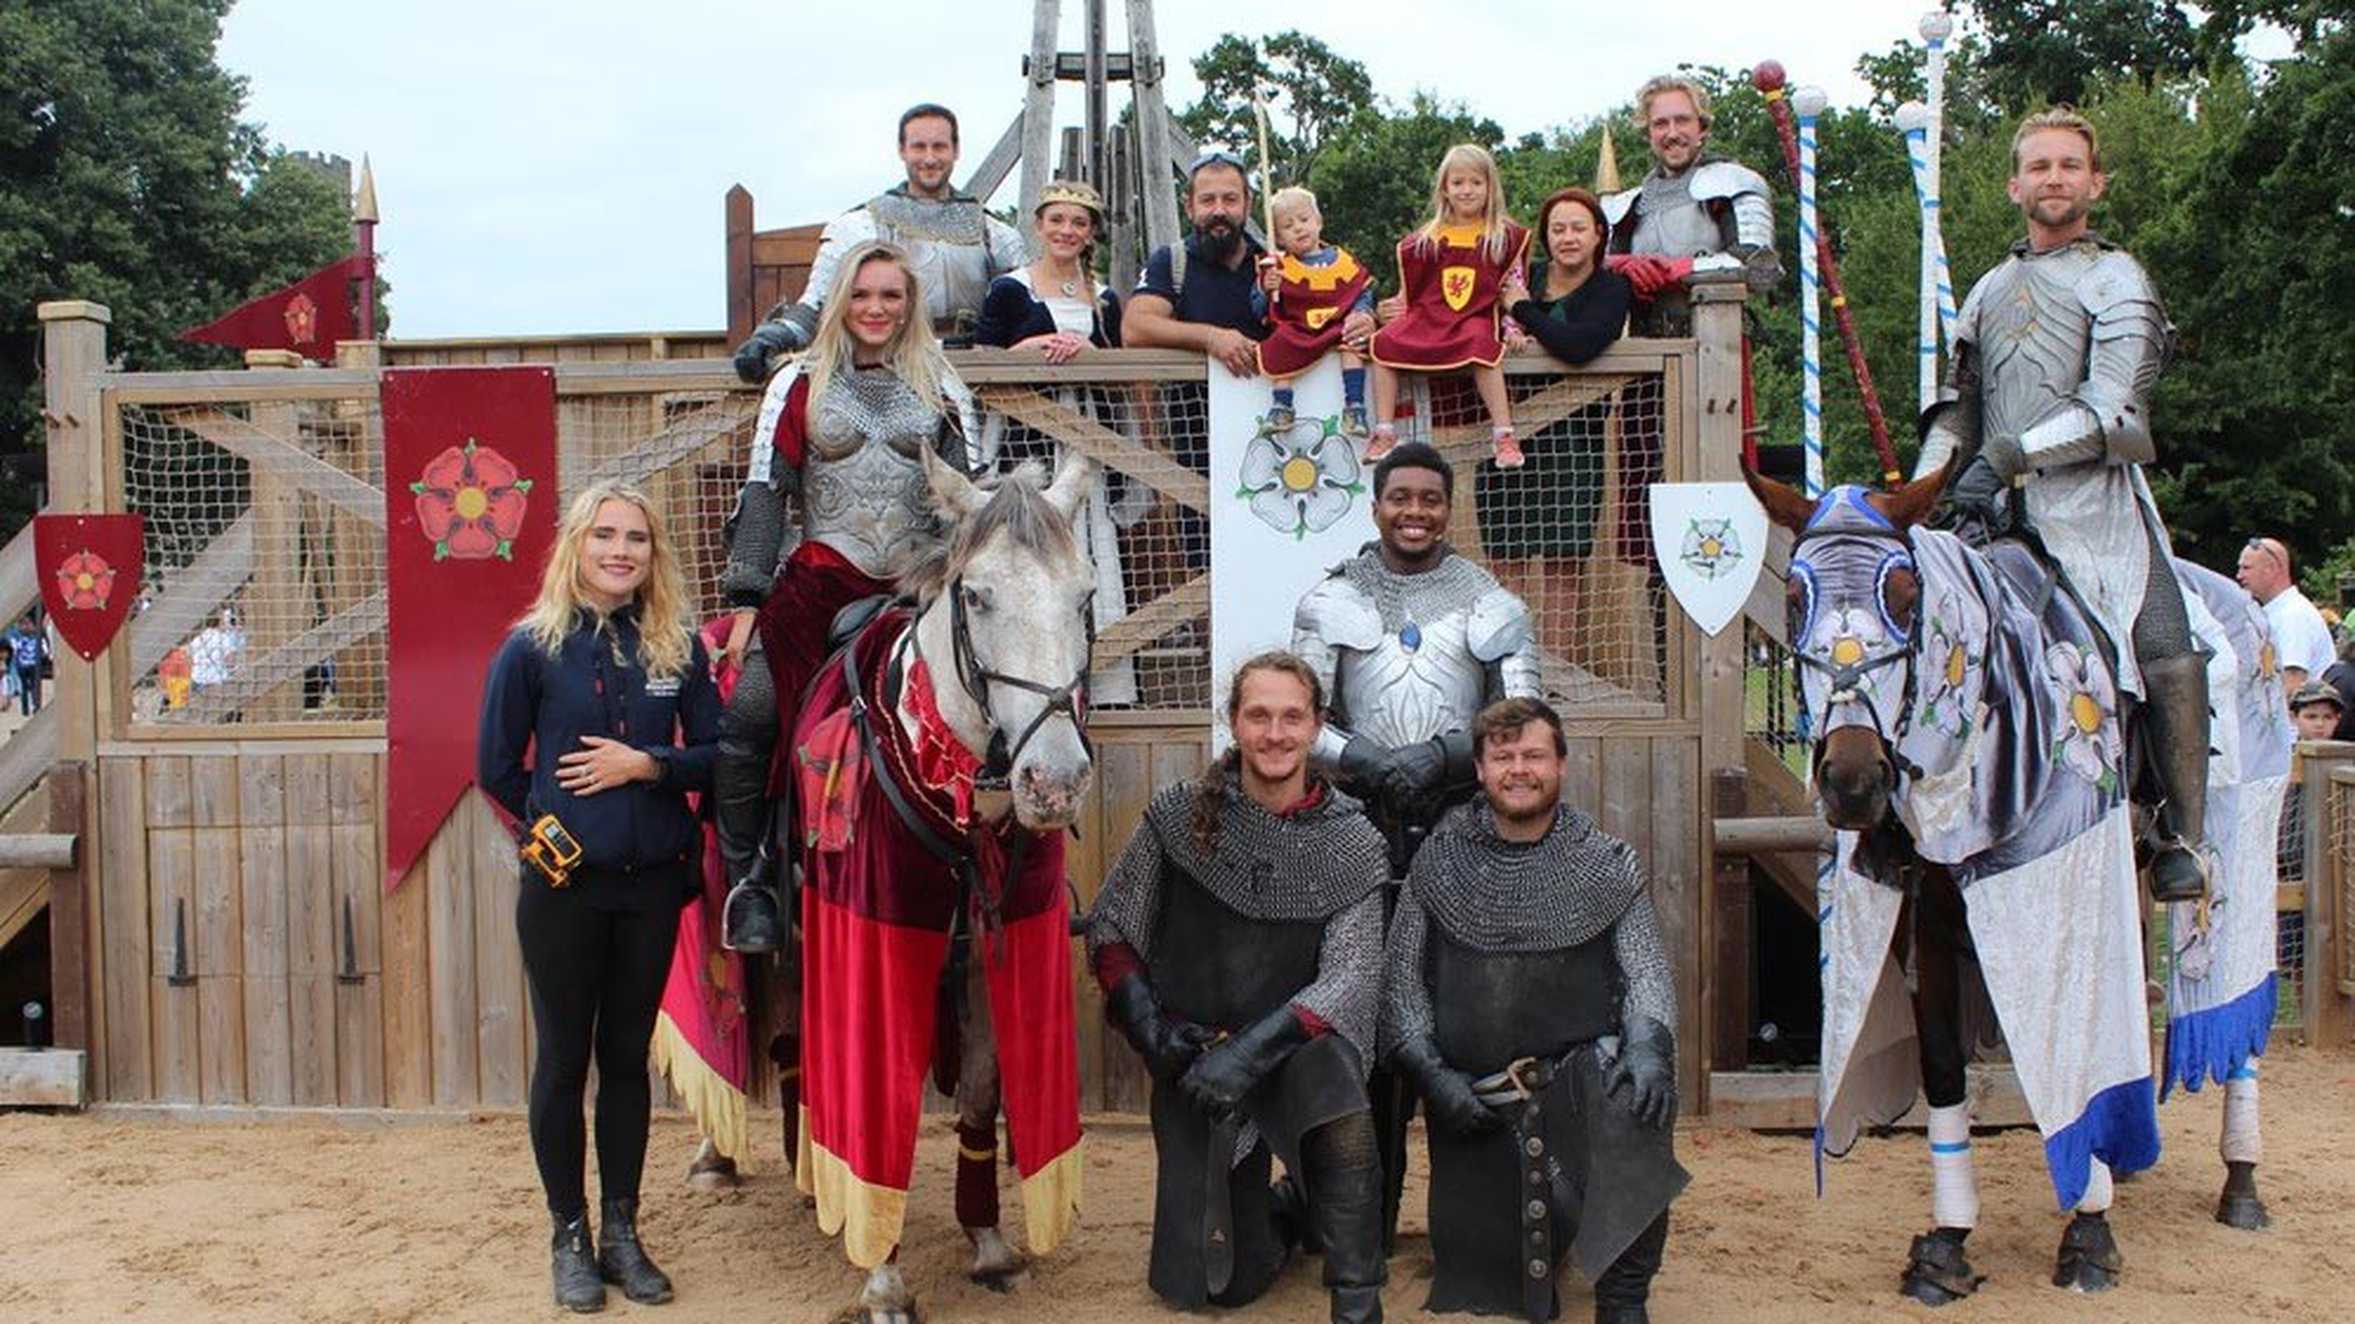 Hunor and his family posing for a group photo with the characters from his wish.